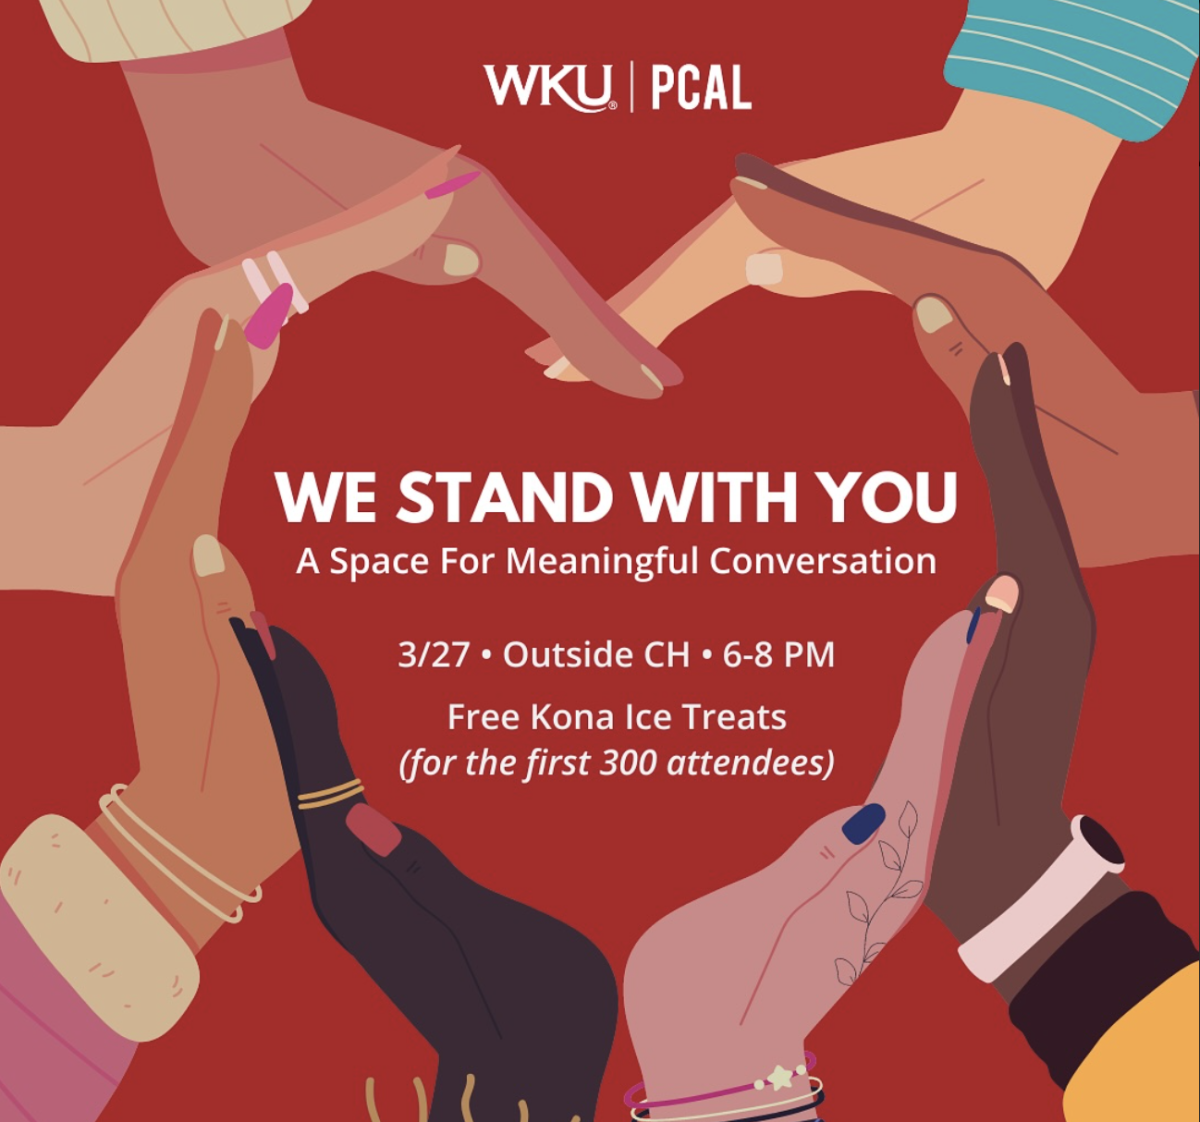 WKU+PCAL+to+host+%E2%80%98We+Stand+With+You%E2%80%99